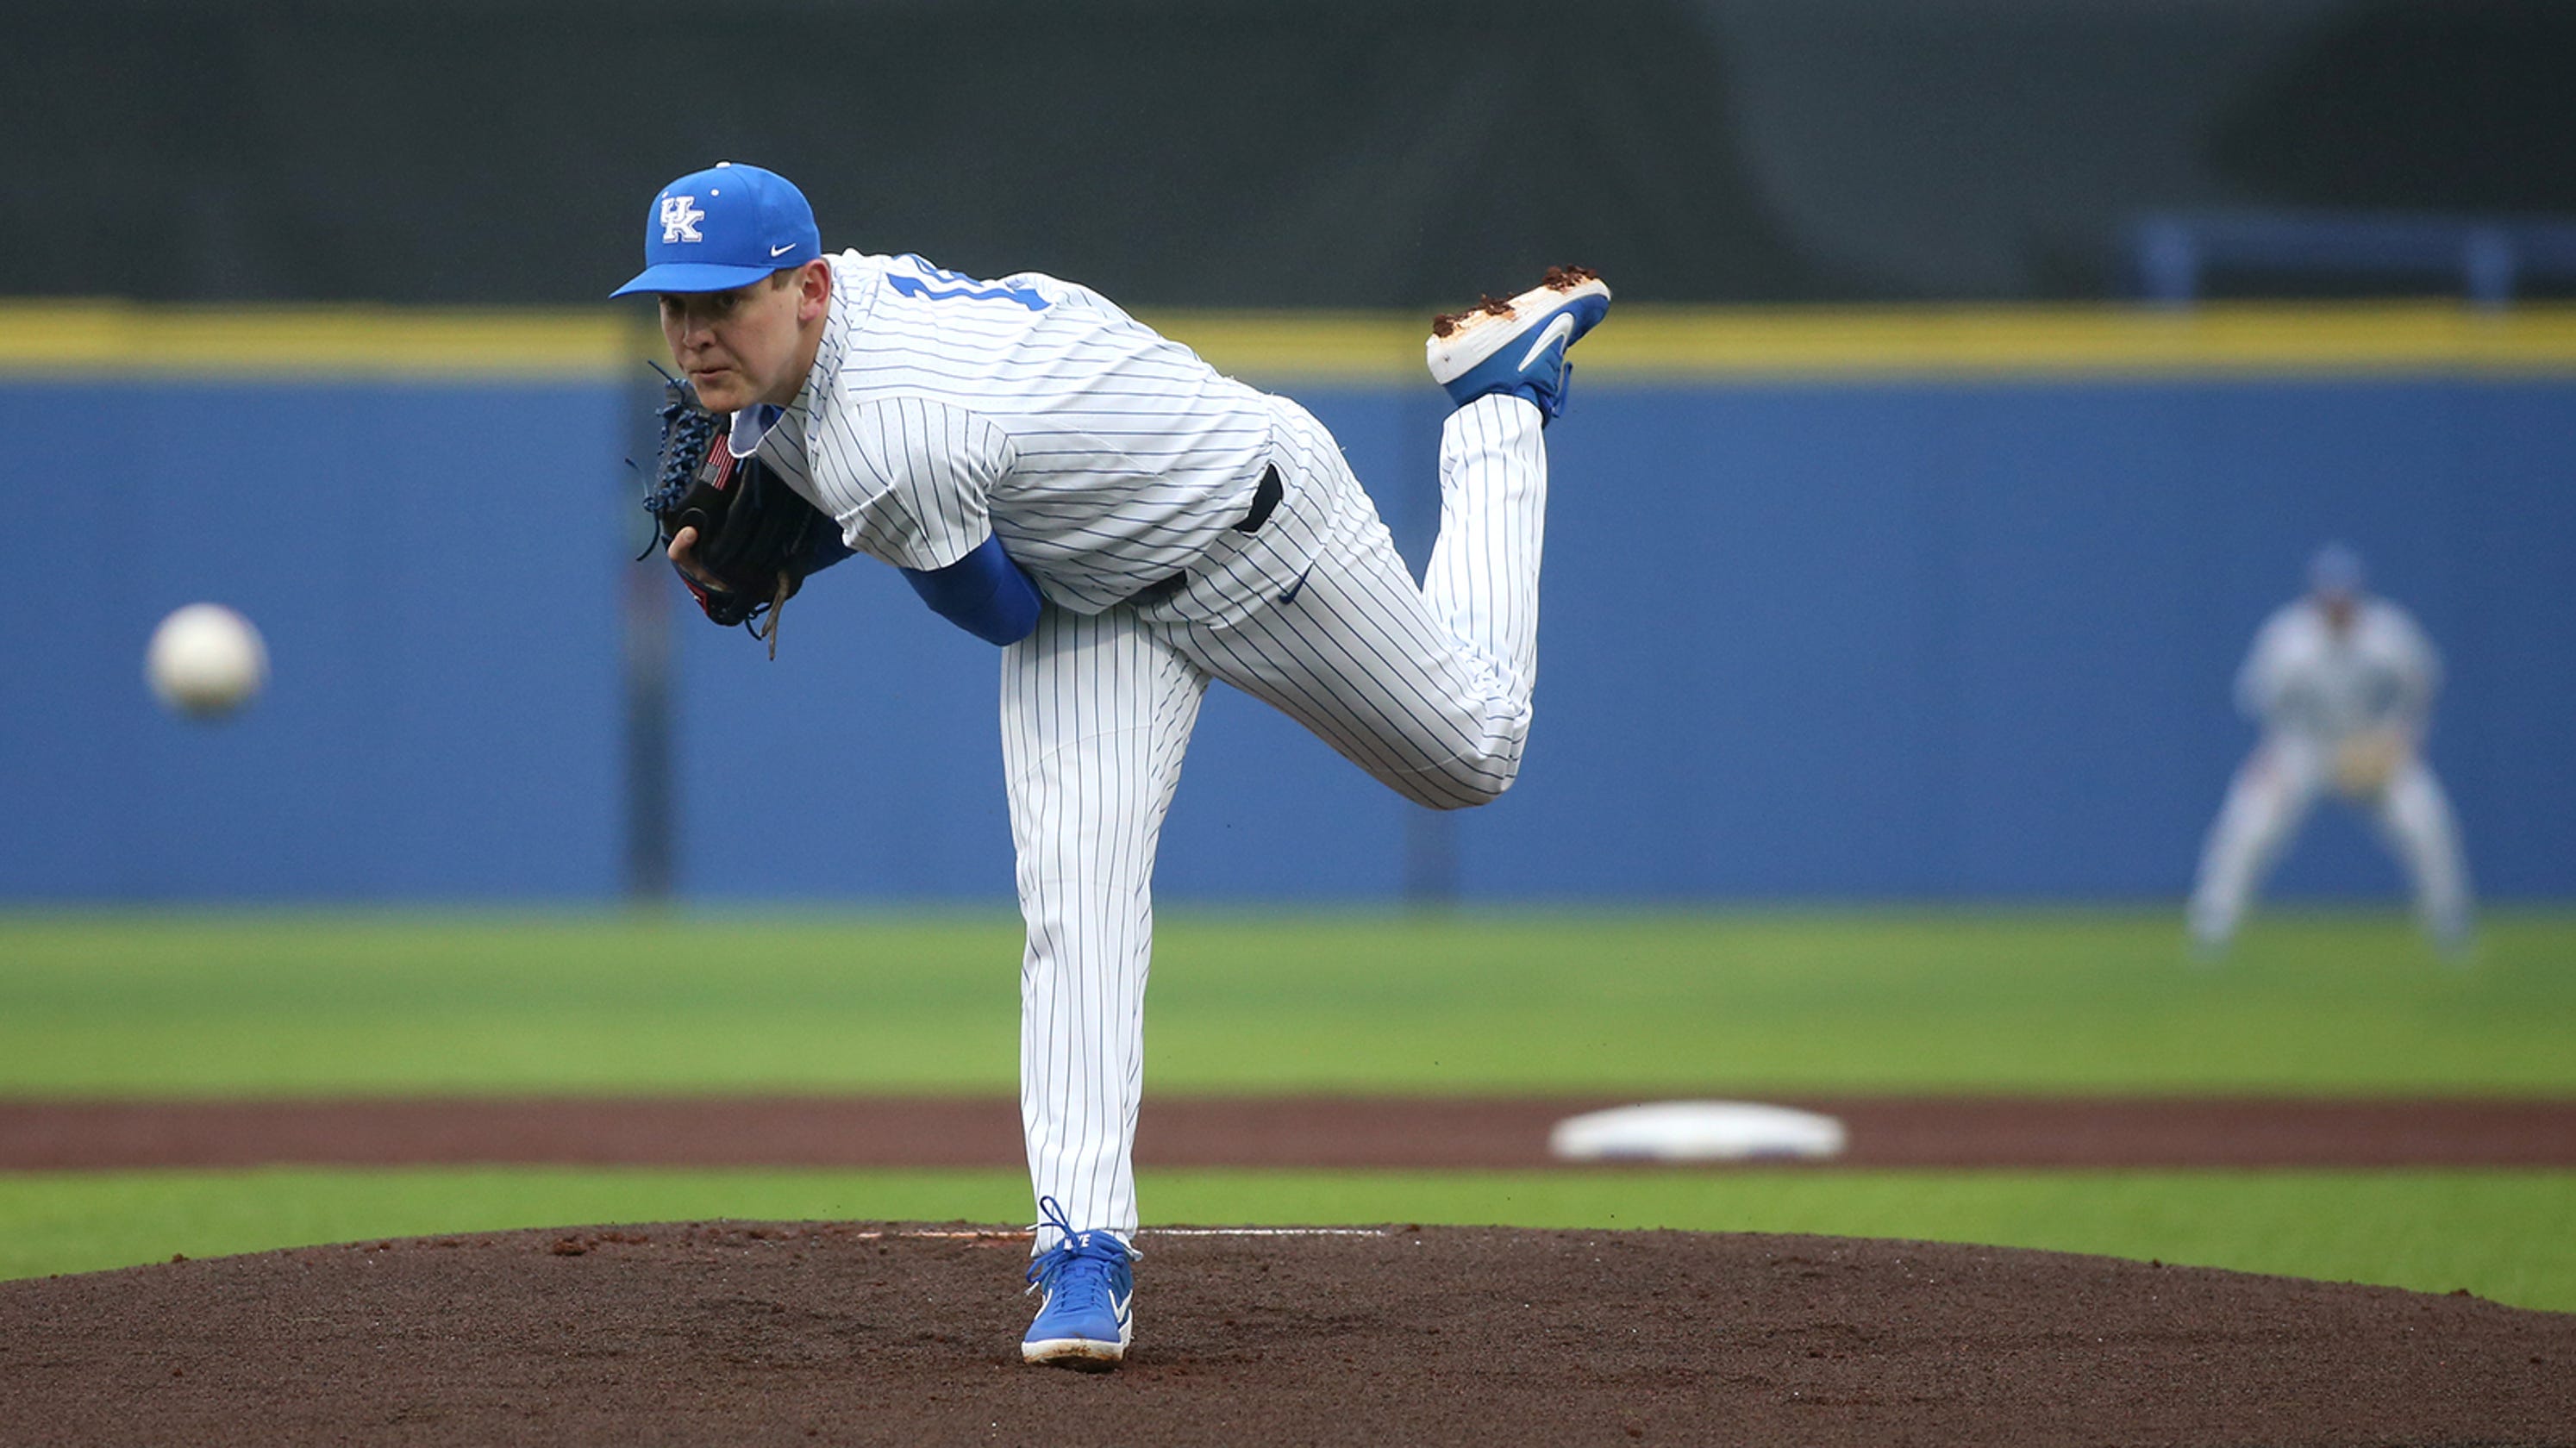 MLB draft 2019: Zack Thompson drafted by St. Louis Cardinals